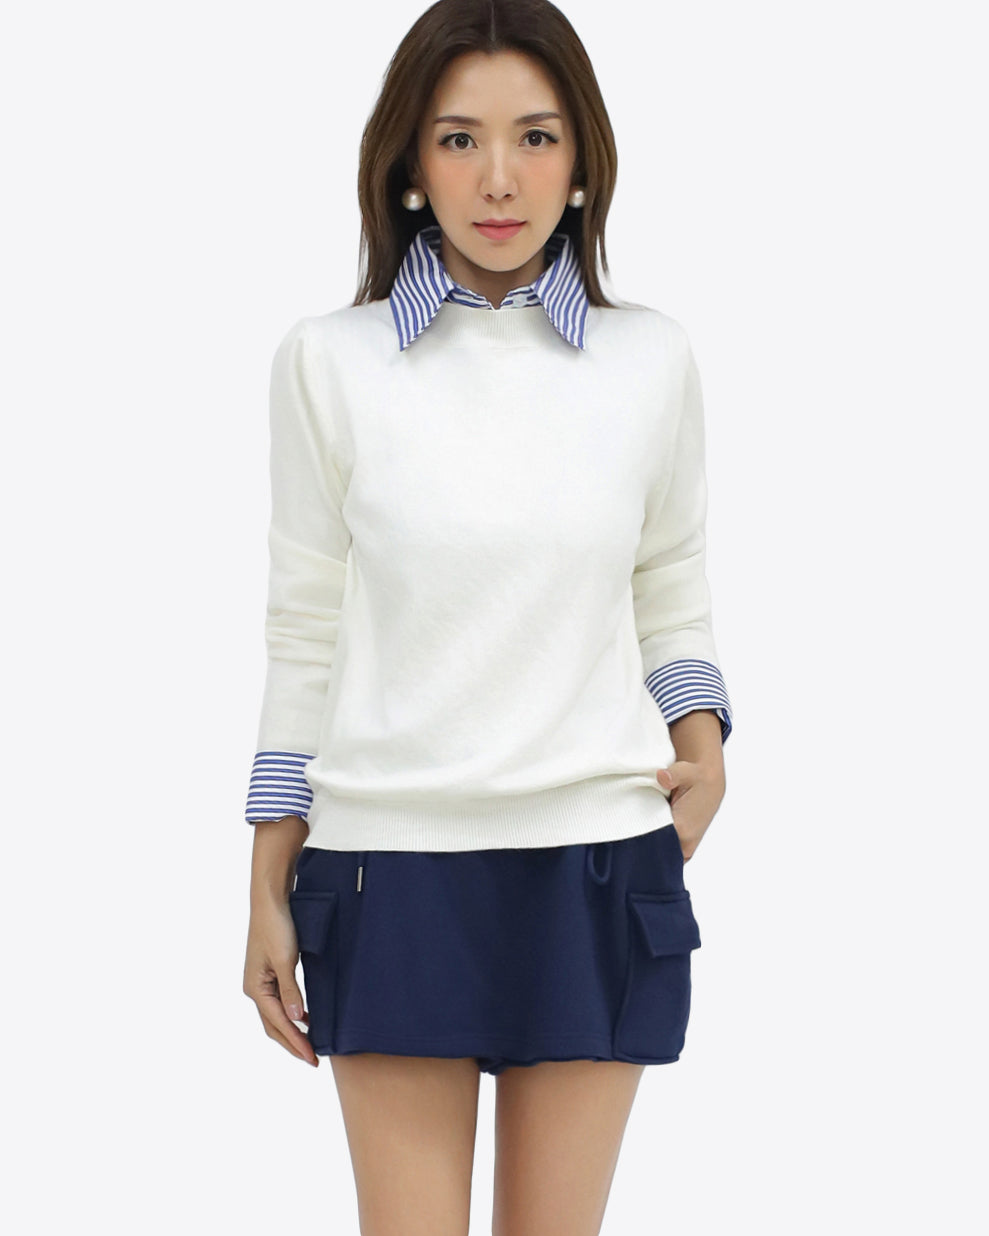 ivory knitted w/ blue stripes shirt collar & cuffs top *pre-order*